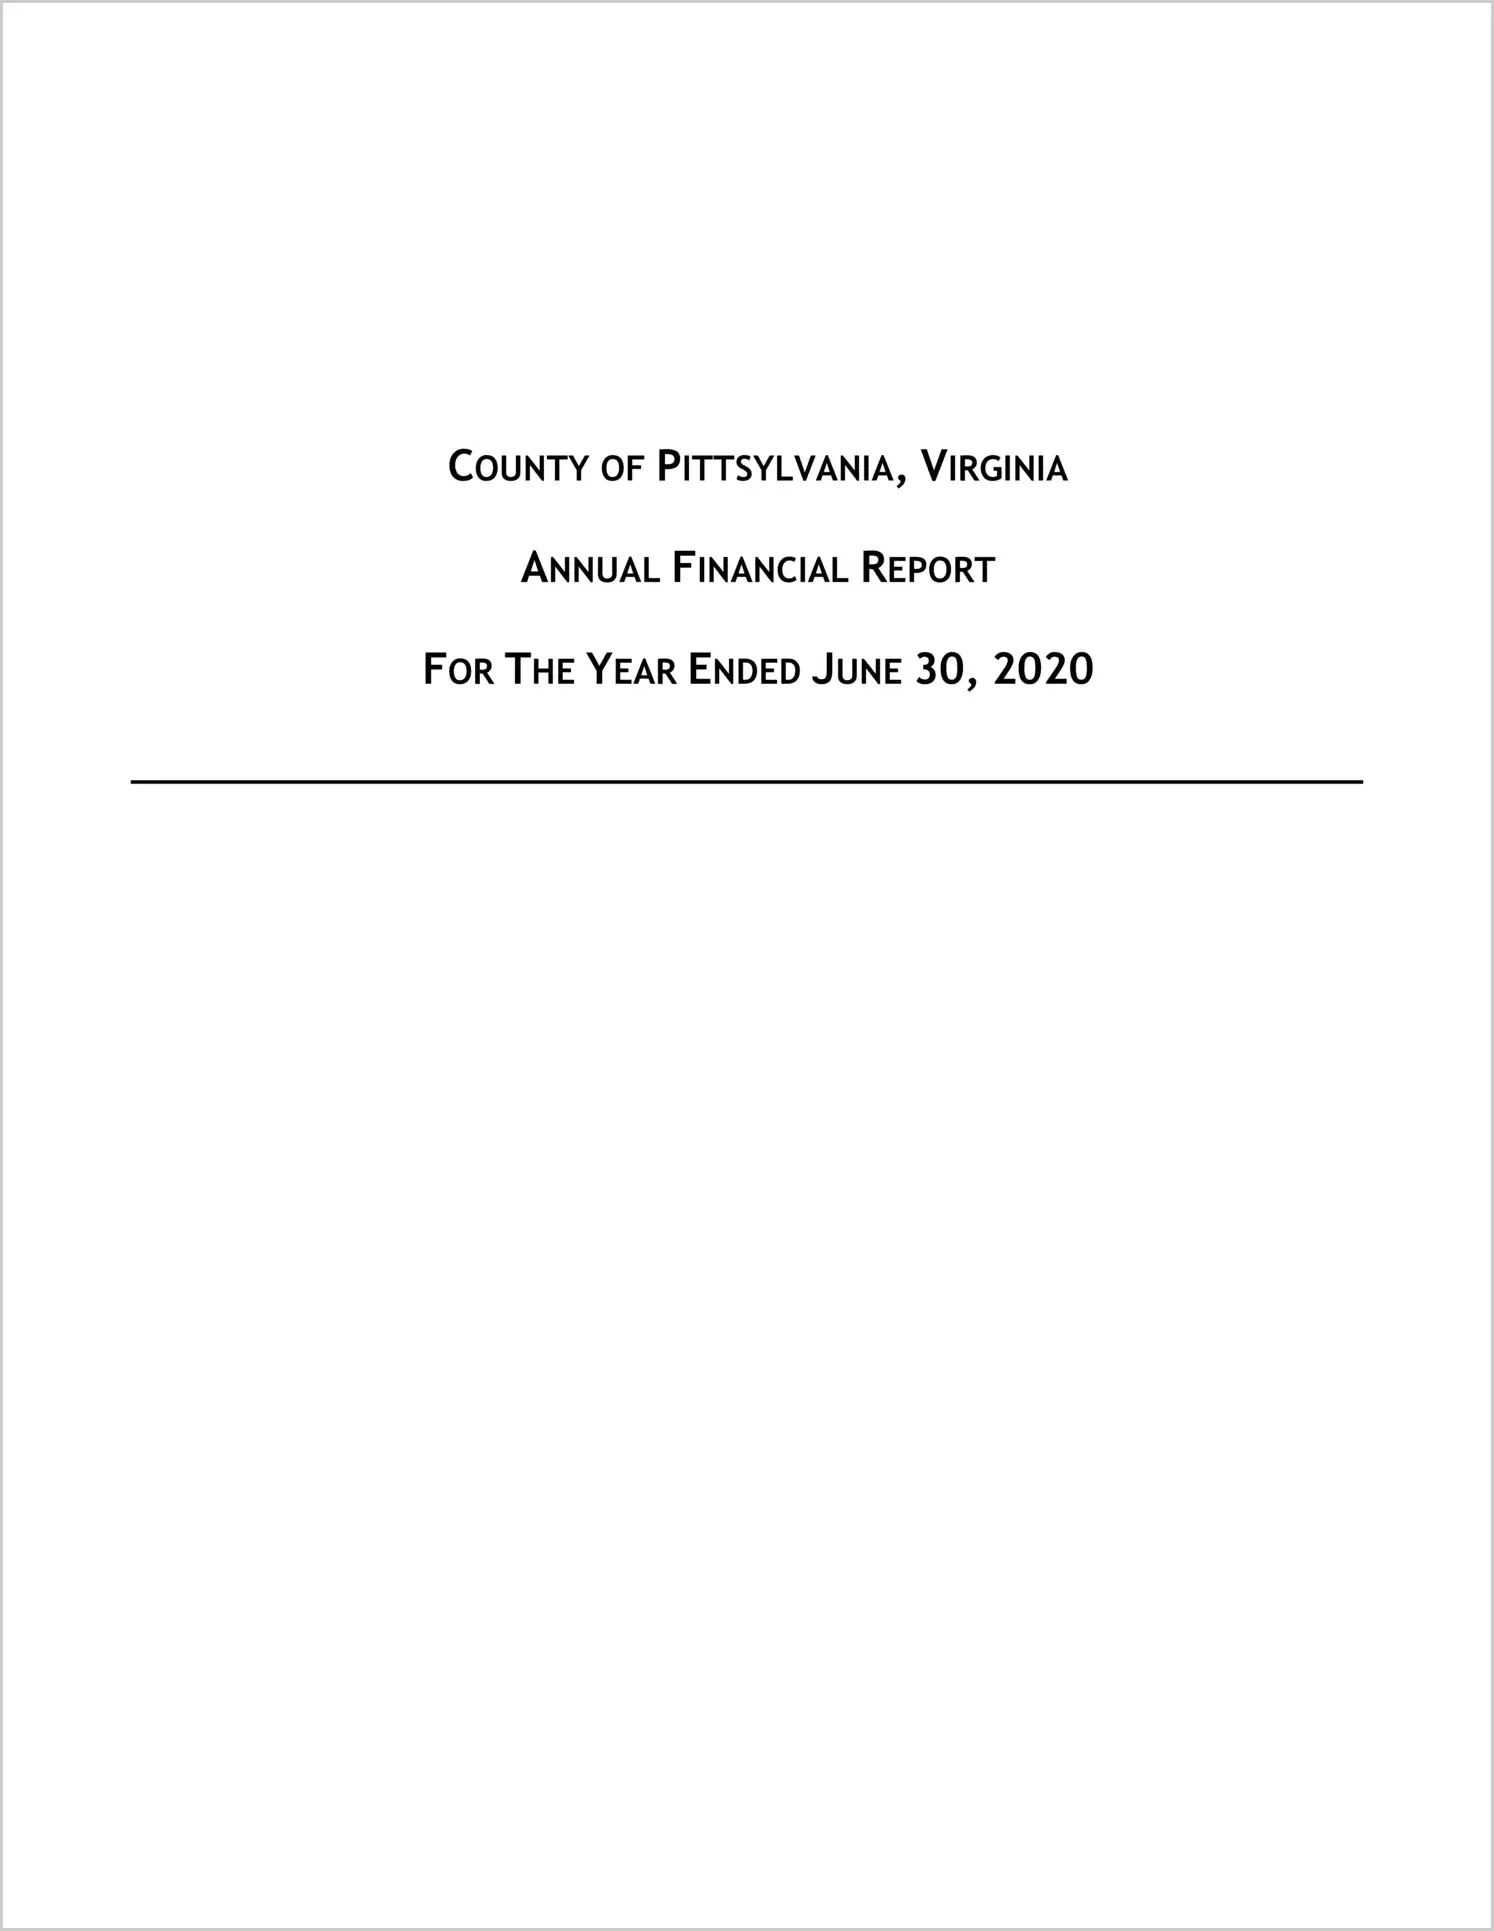 2020 Annual Financial Report for County of Pittsylvania